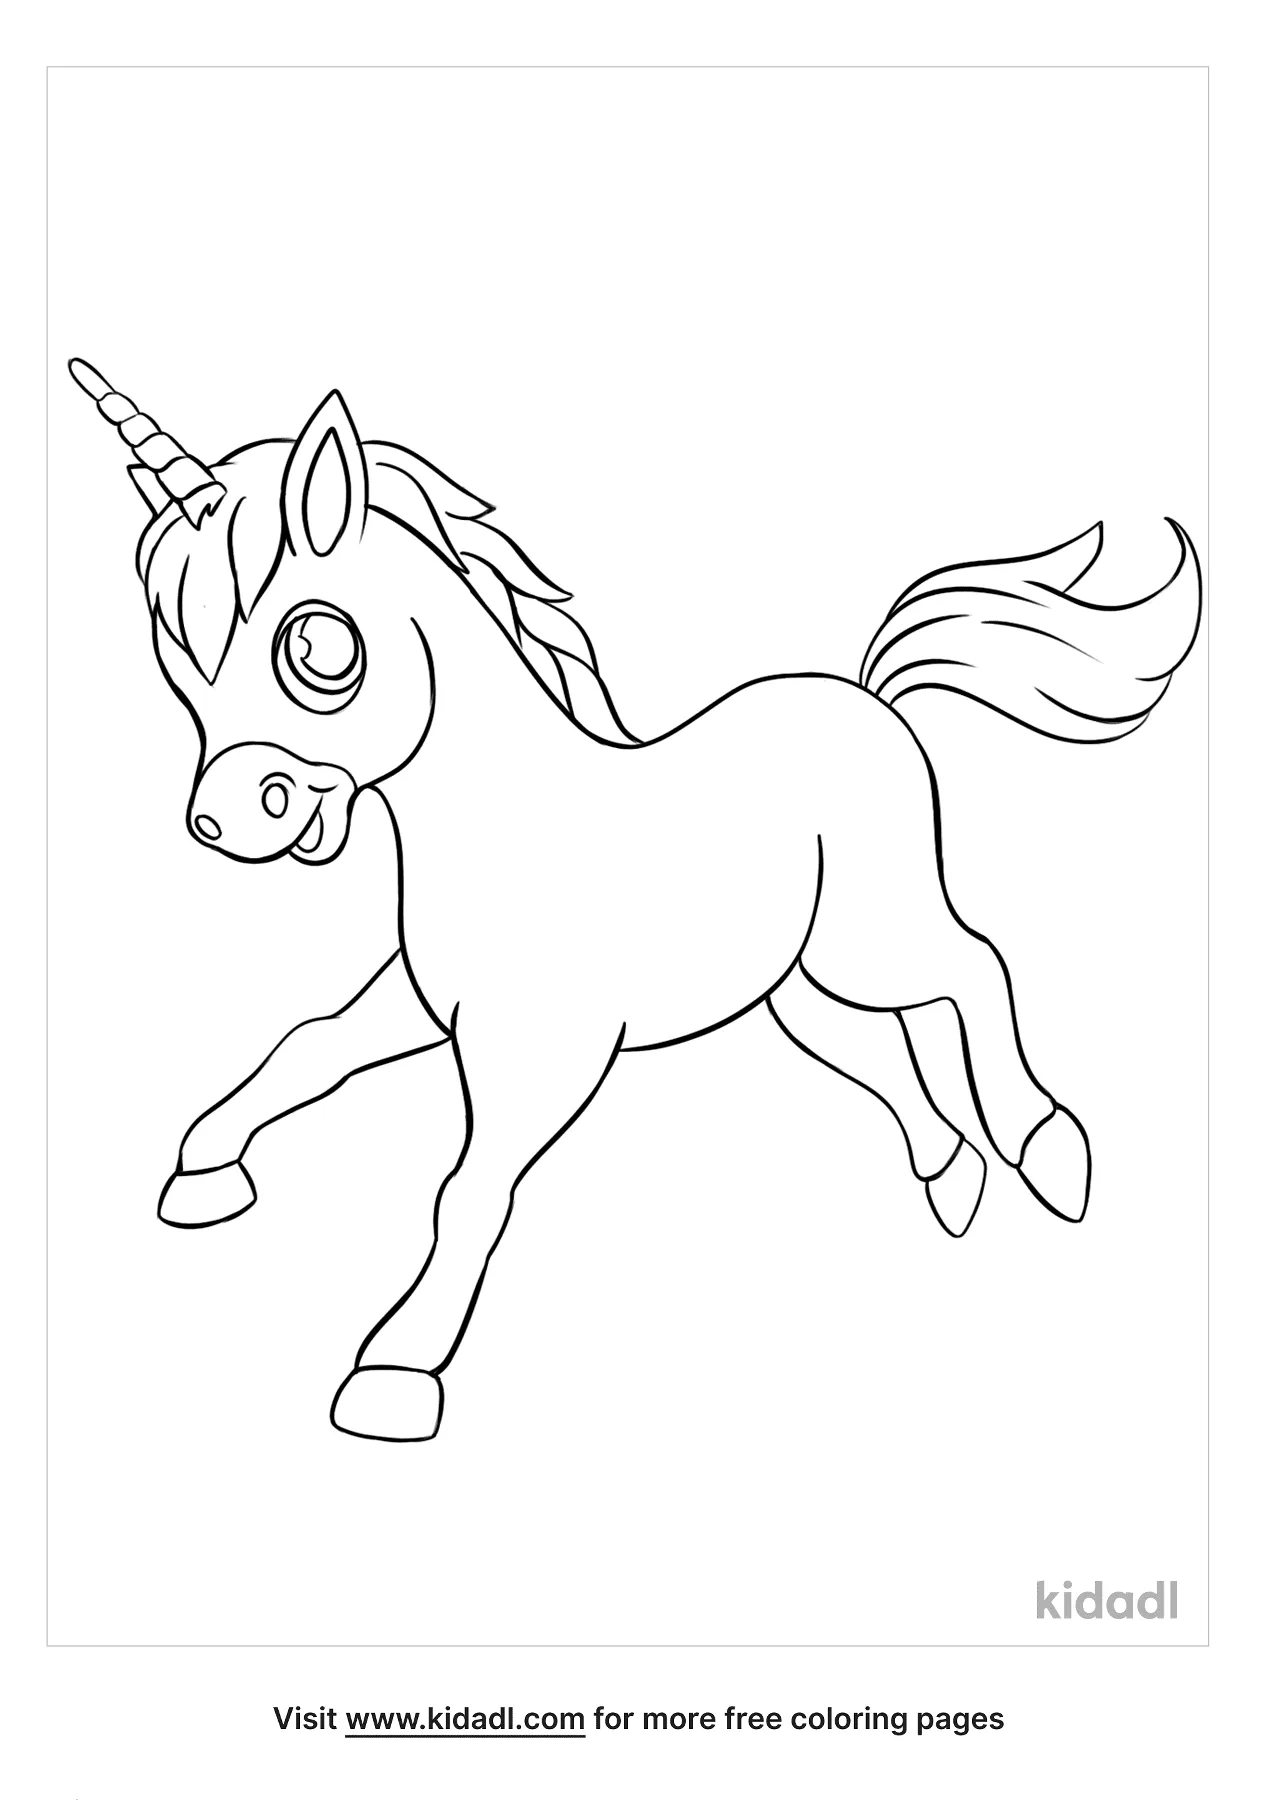 Baby Unicorn Coloring Pages   Free Unicorns Coloring Pages   Kidadl